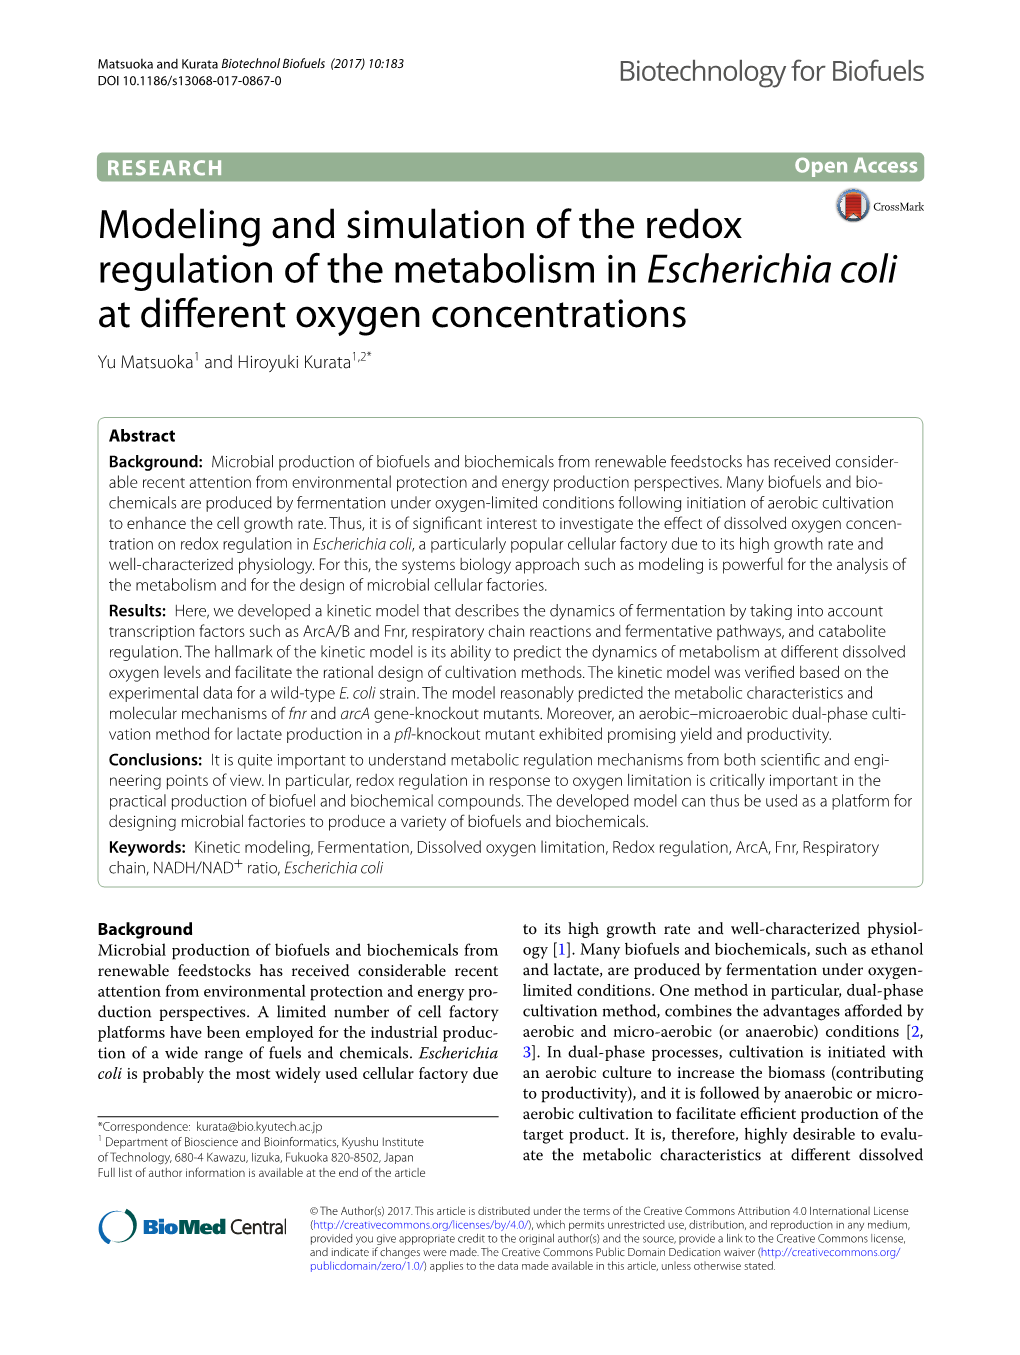 Modeling and Simulation of the Redox Regulation of the Metabolism in Escherichia Coli at Diferent Oxygen Concentrations Yu Matsuoka1 and Hiroyuki Kurata1,2*